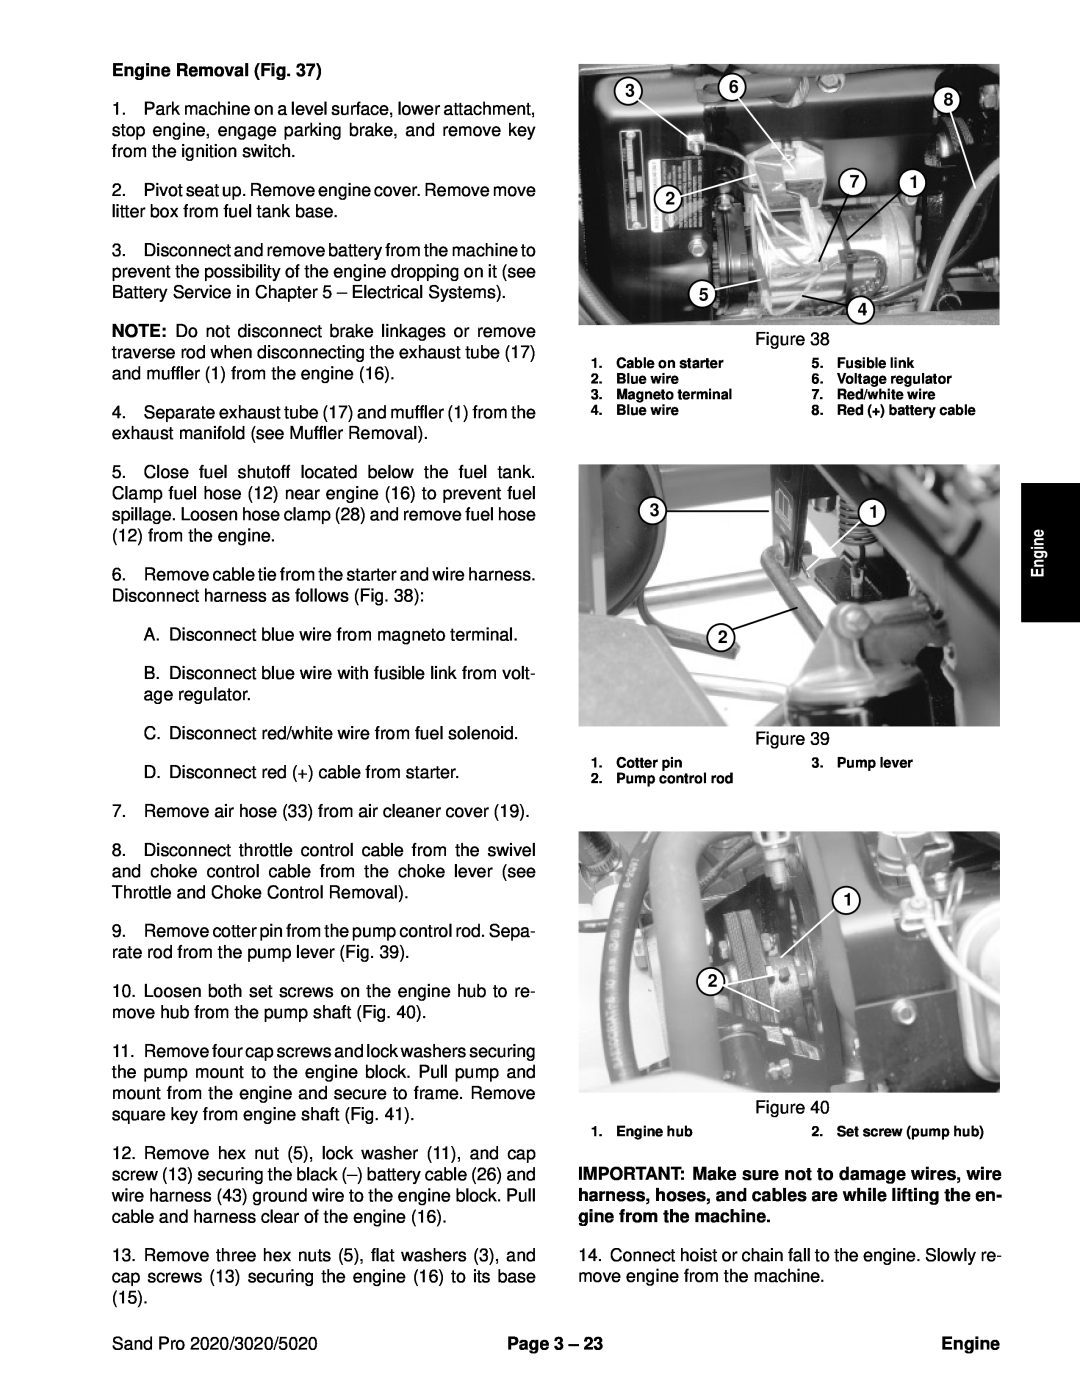 Toro service manual Engine Removal Fig, Sand Pro 2020/3020/5020, Page 3 